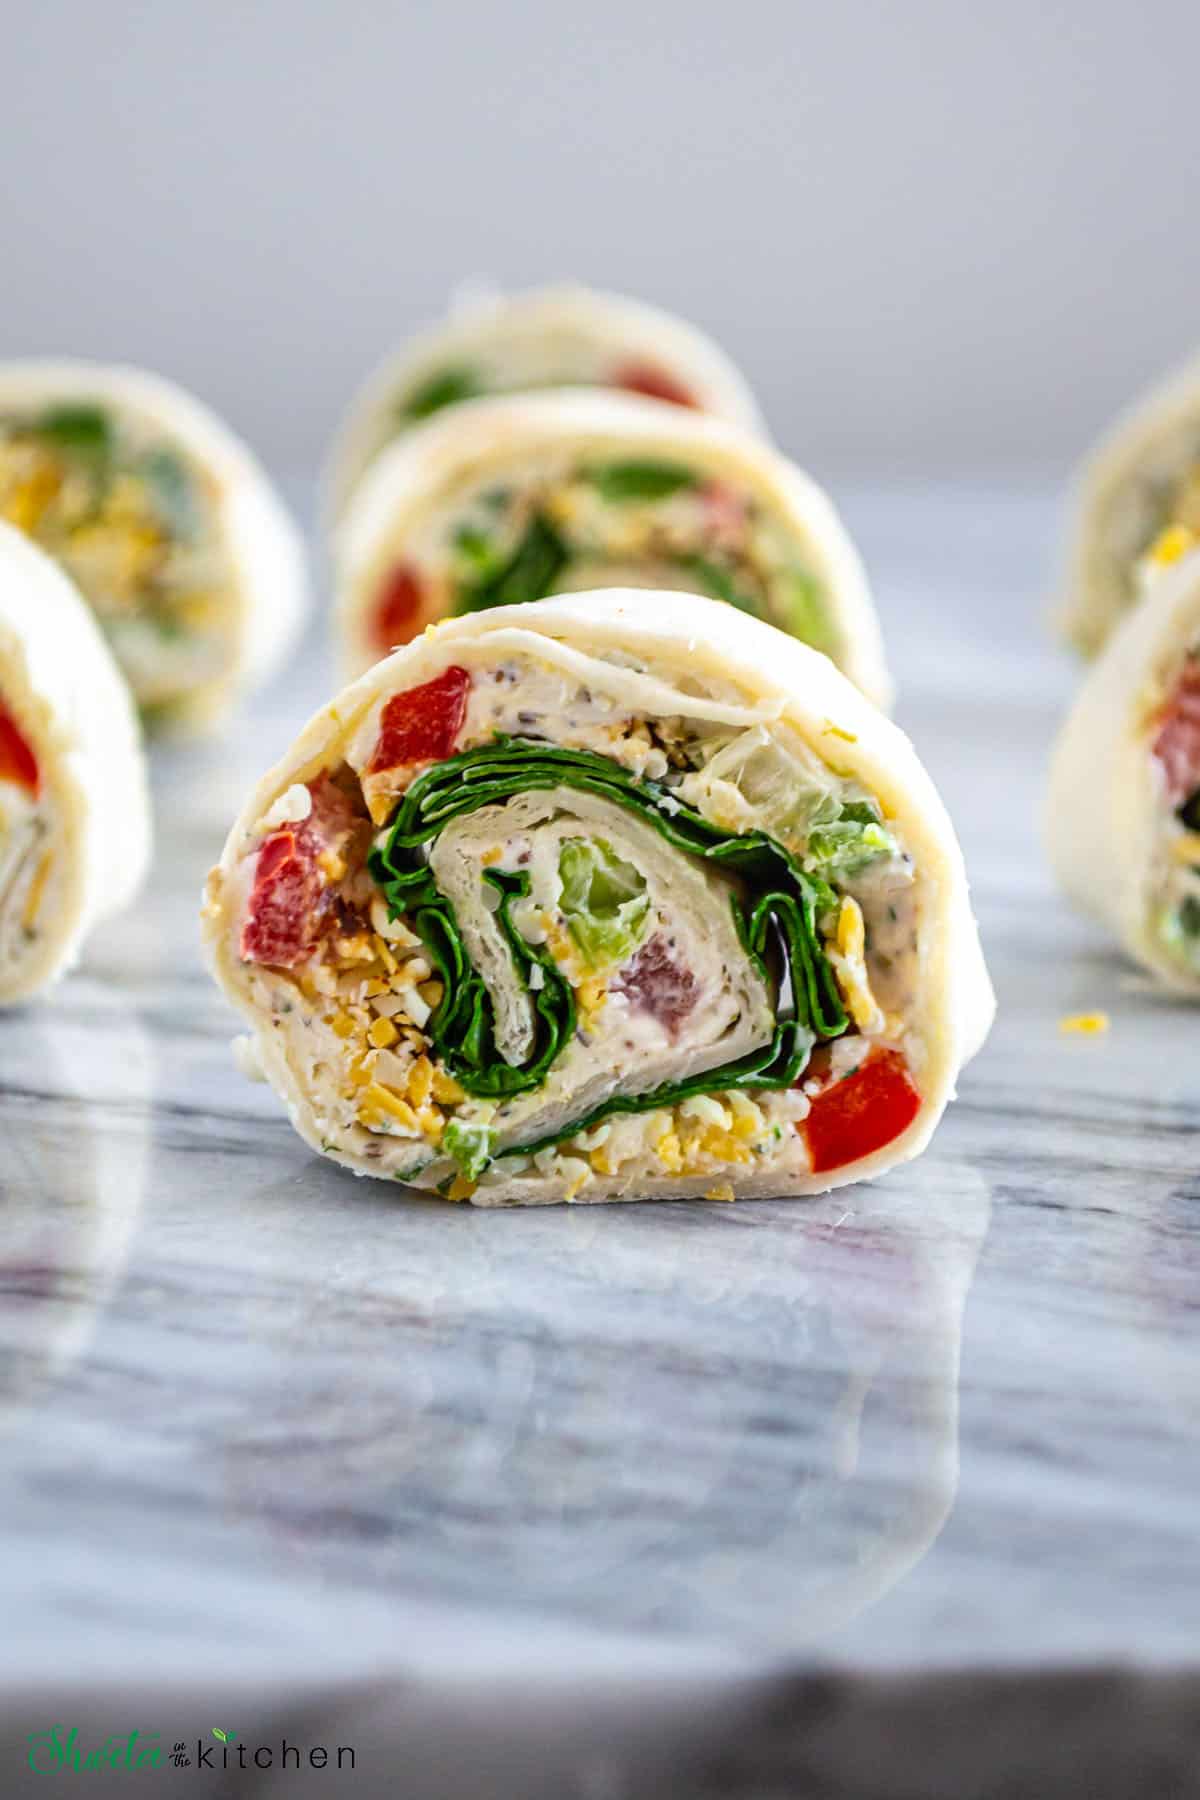 Vegetarian Tortilla pinwheels cut into slices showing the colorful filling